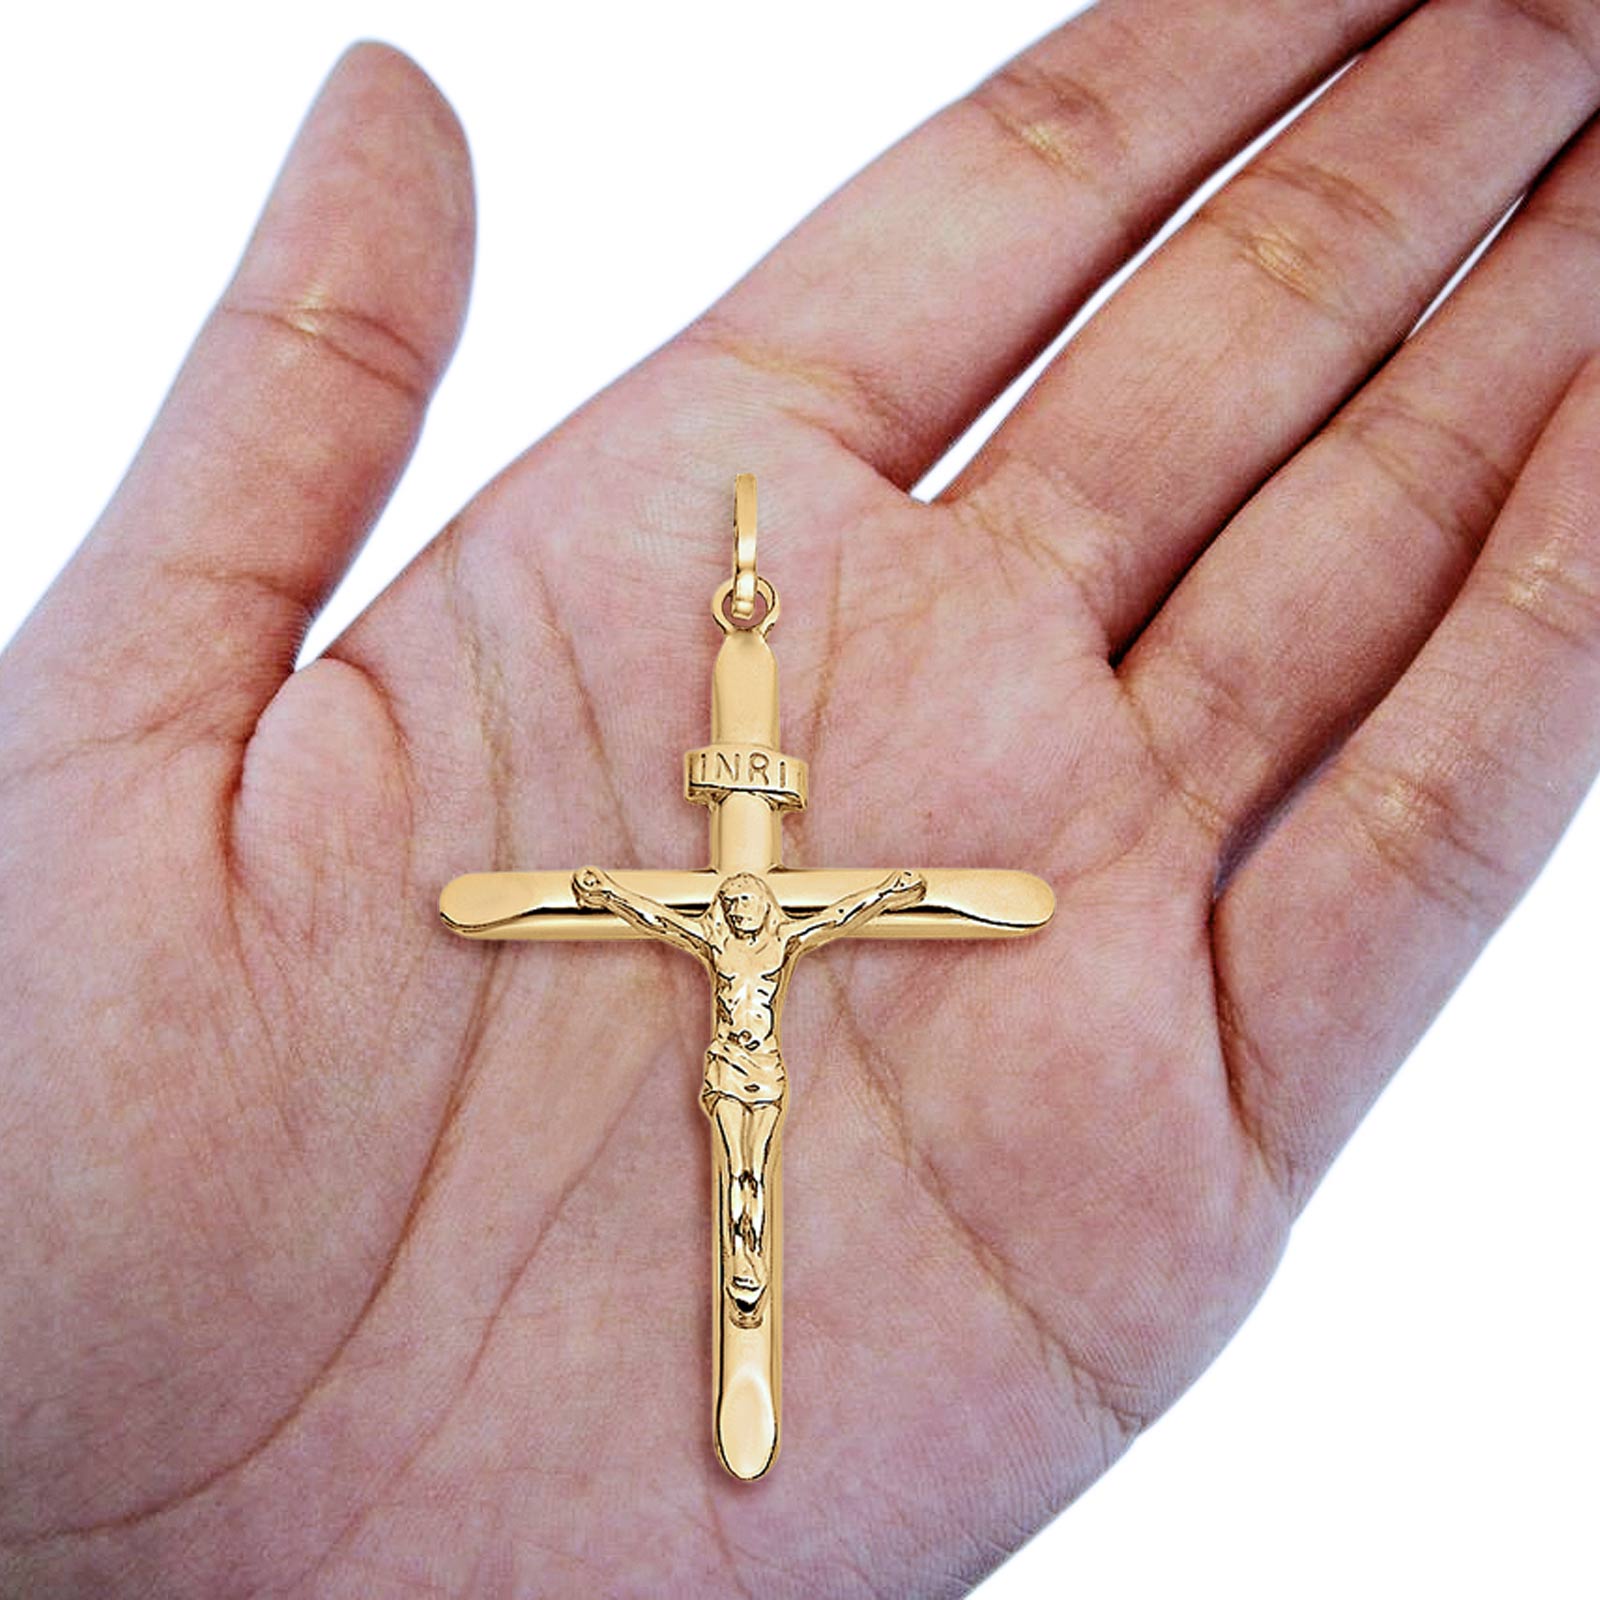 14K Yellow Gold Real Religious Crucifix Charm Pendant 1.8gm